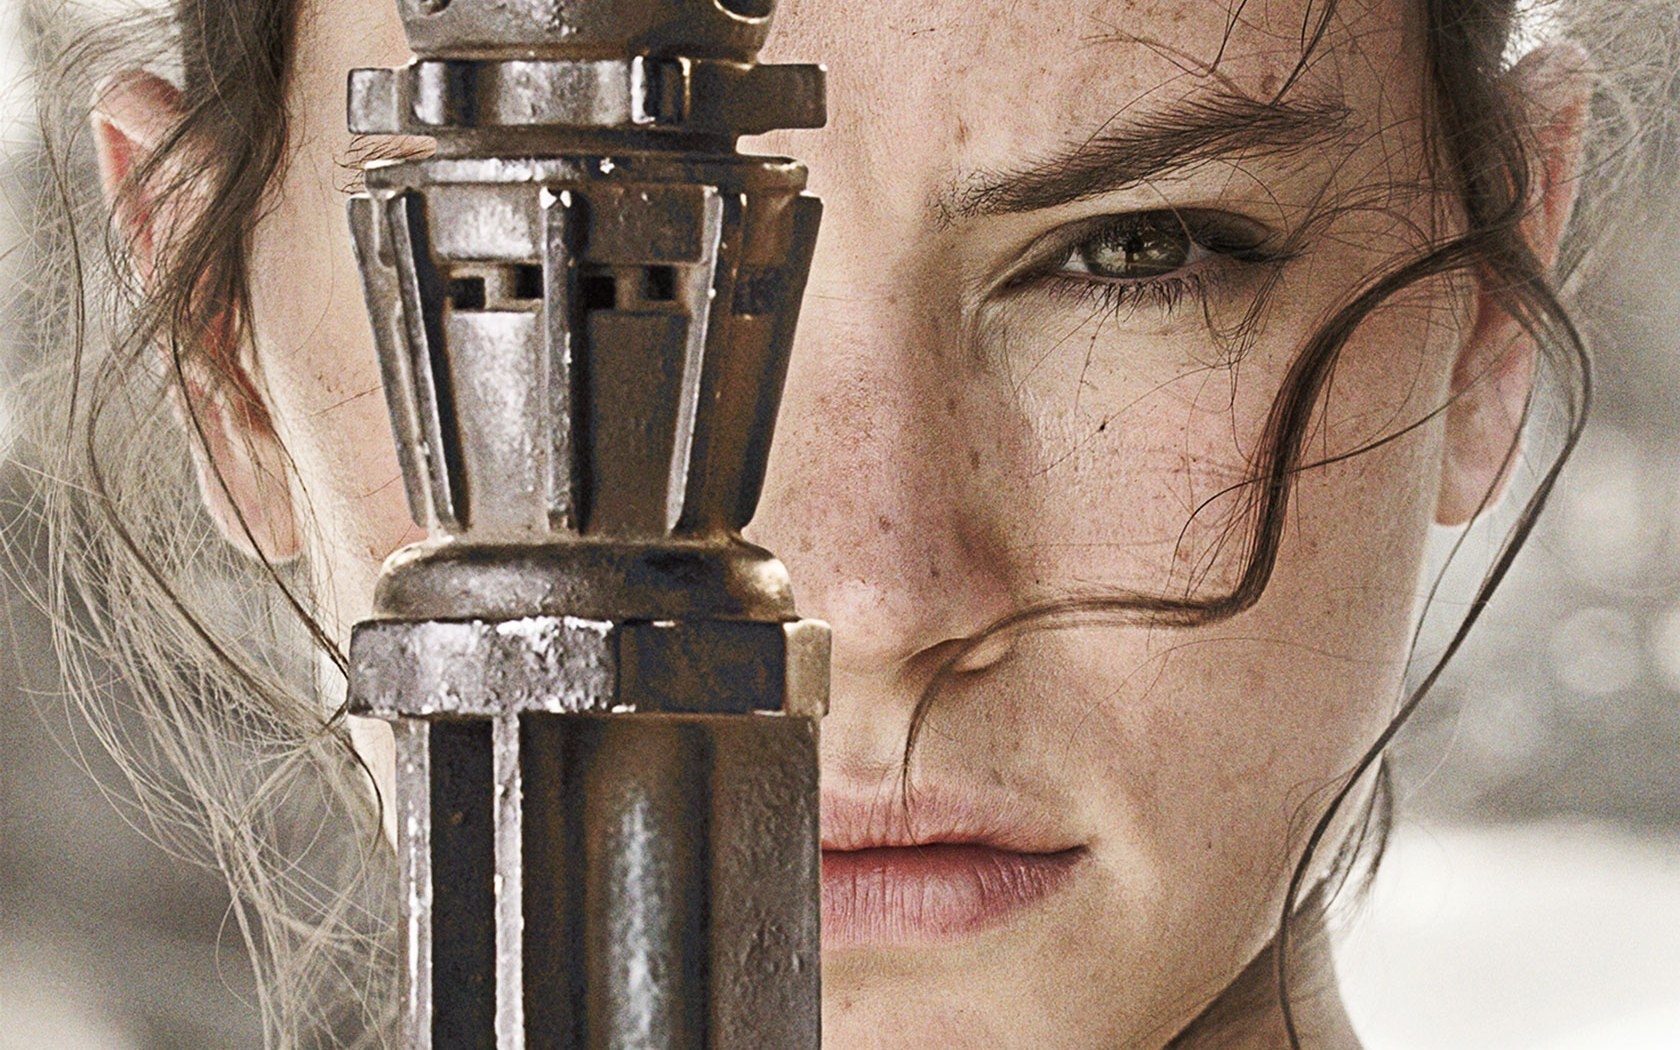 Daisy Ridley 2017 Wallpapers